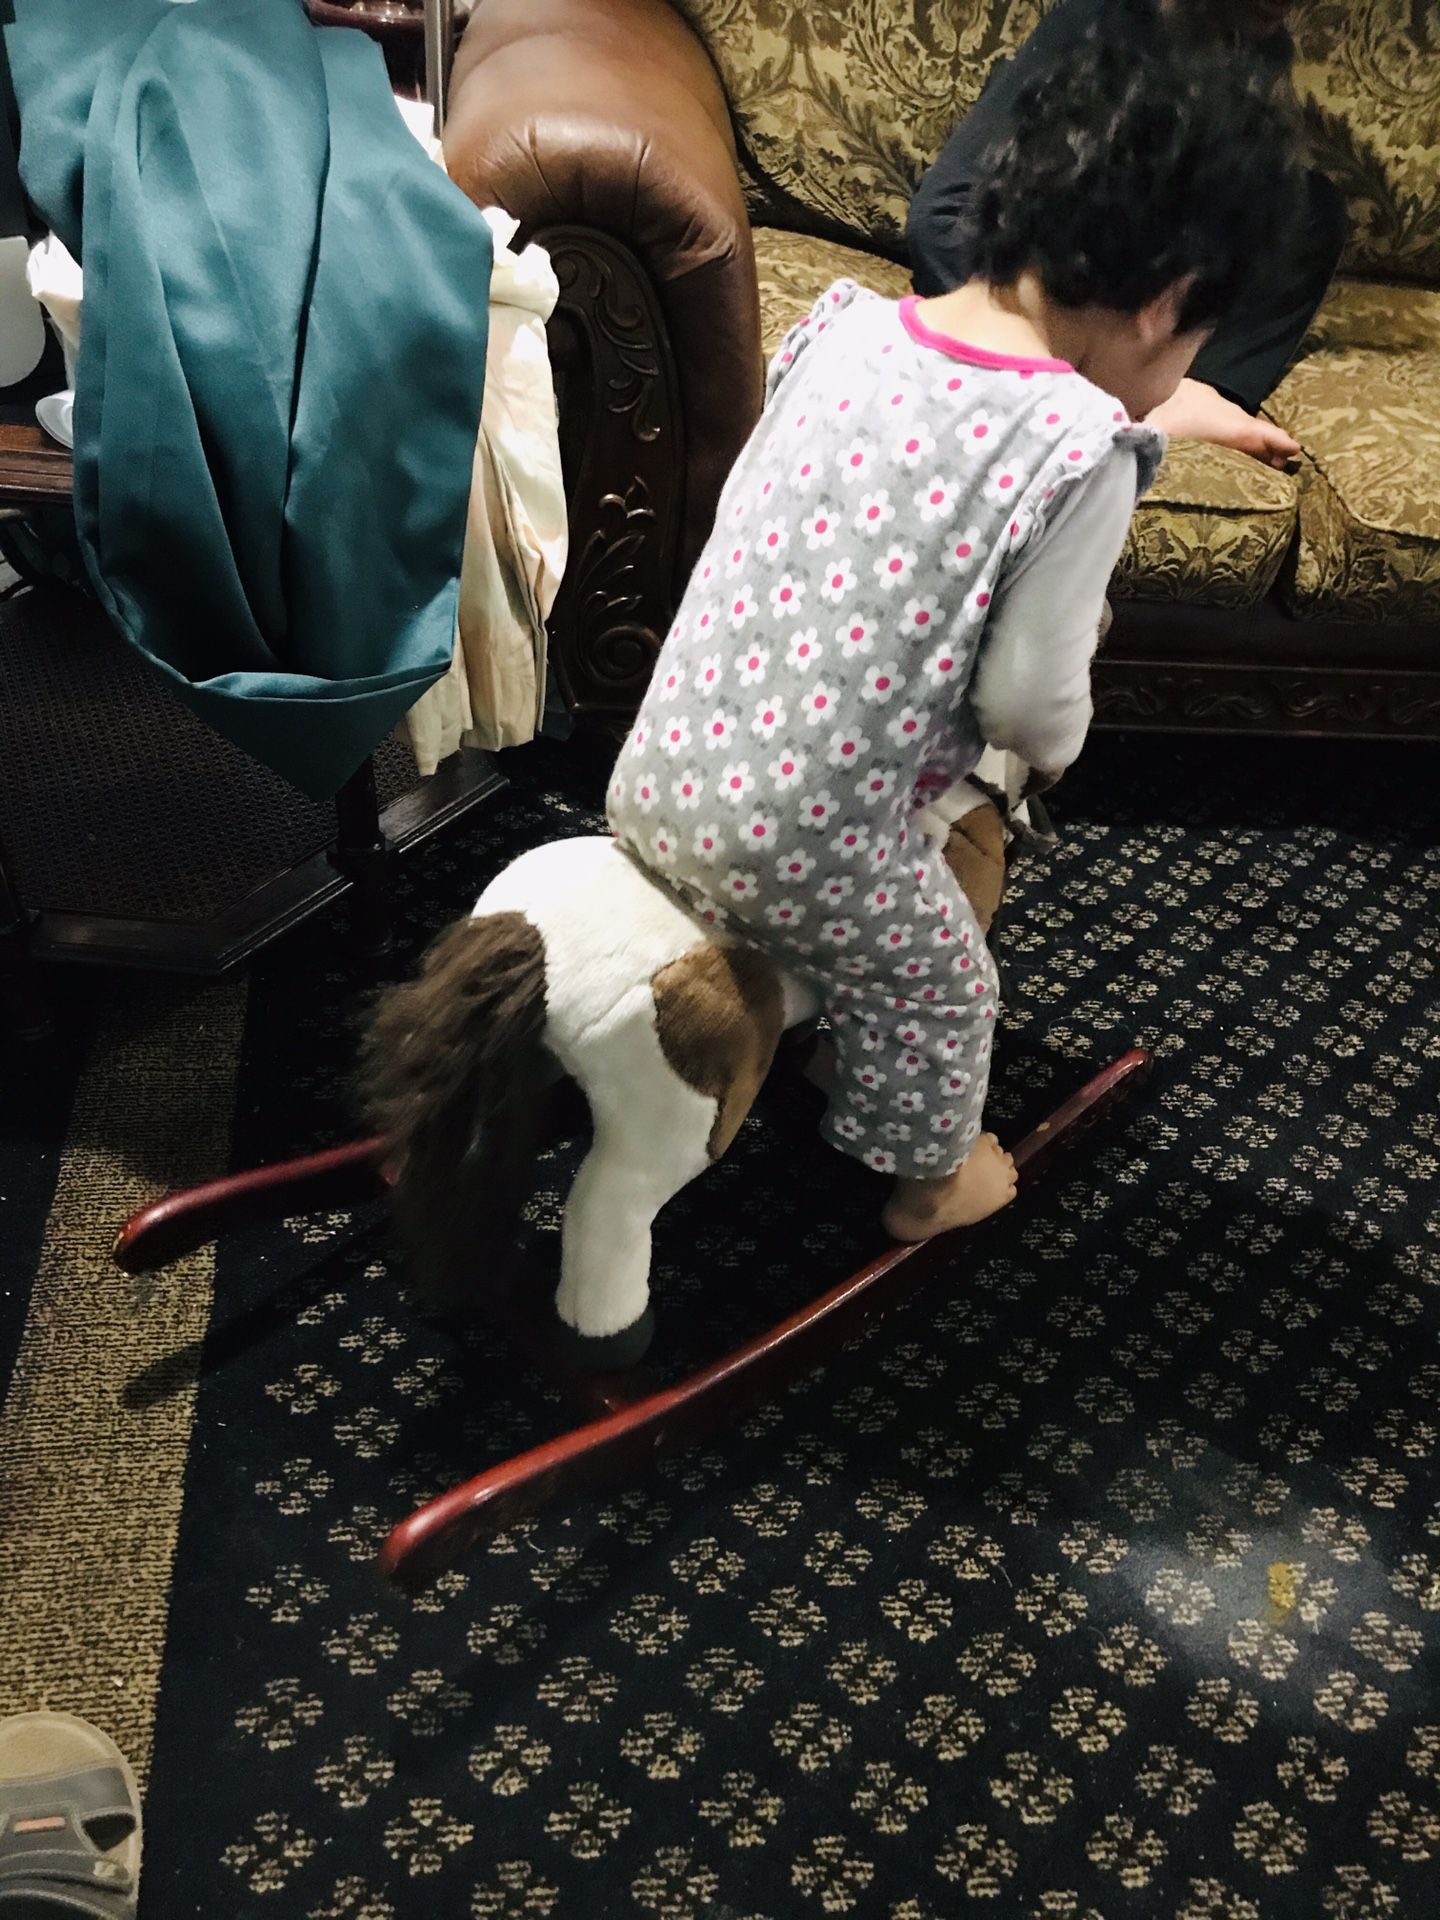 Free Small rocking horse 1 ear missing